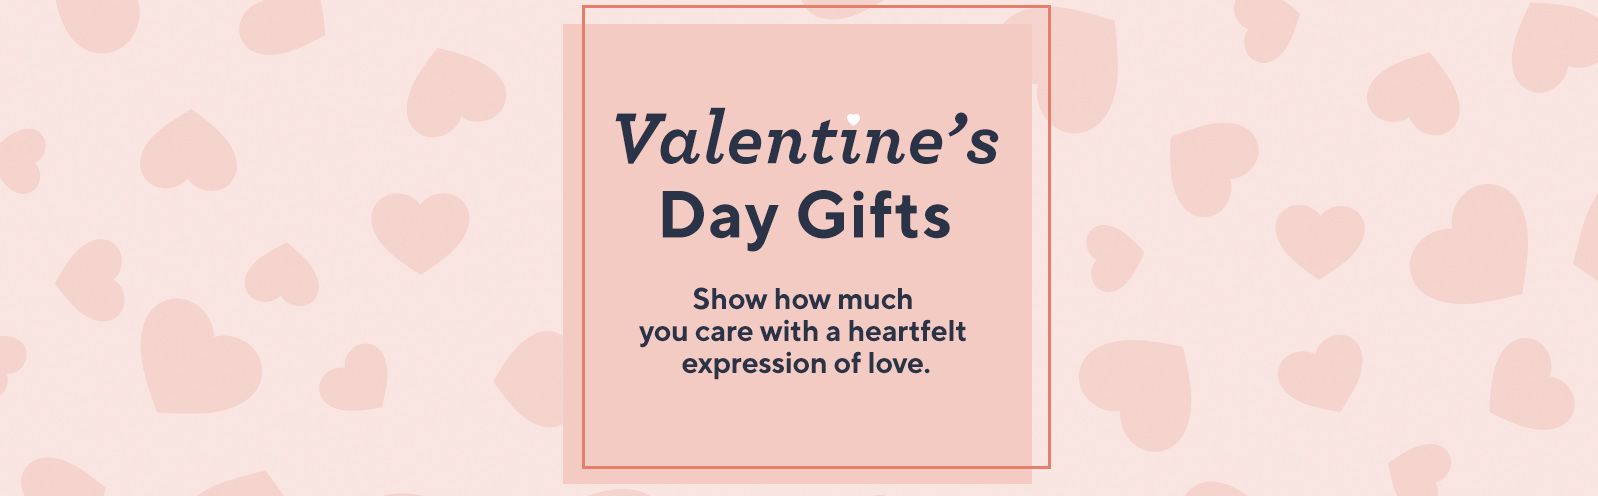 Valentine's Day Gifts - Show how much you care with a heartfelt expression of love.